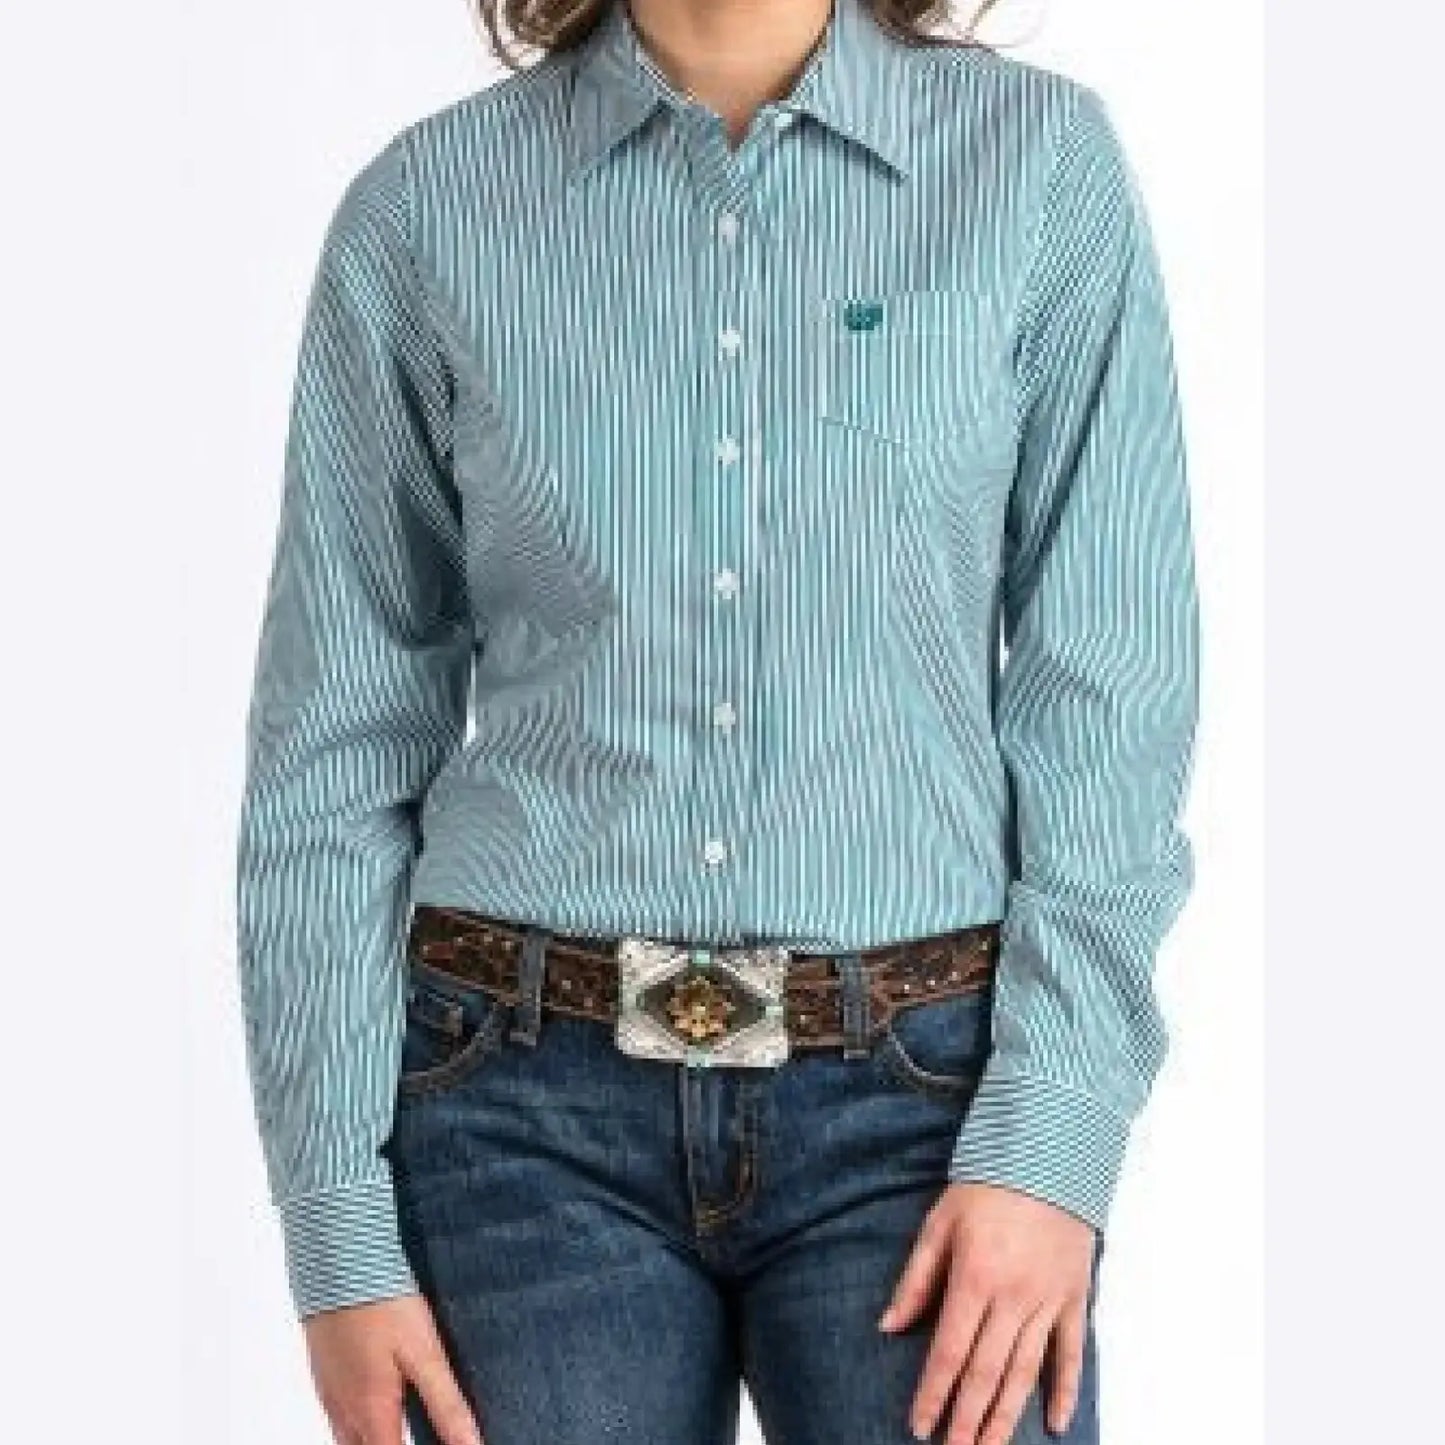 Cinch Women’s Western Shirt Teal And White Stripe Button Up MSW9164088 TEA - Cinch